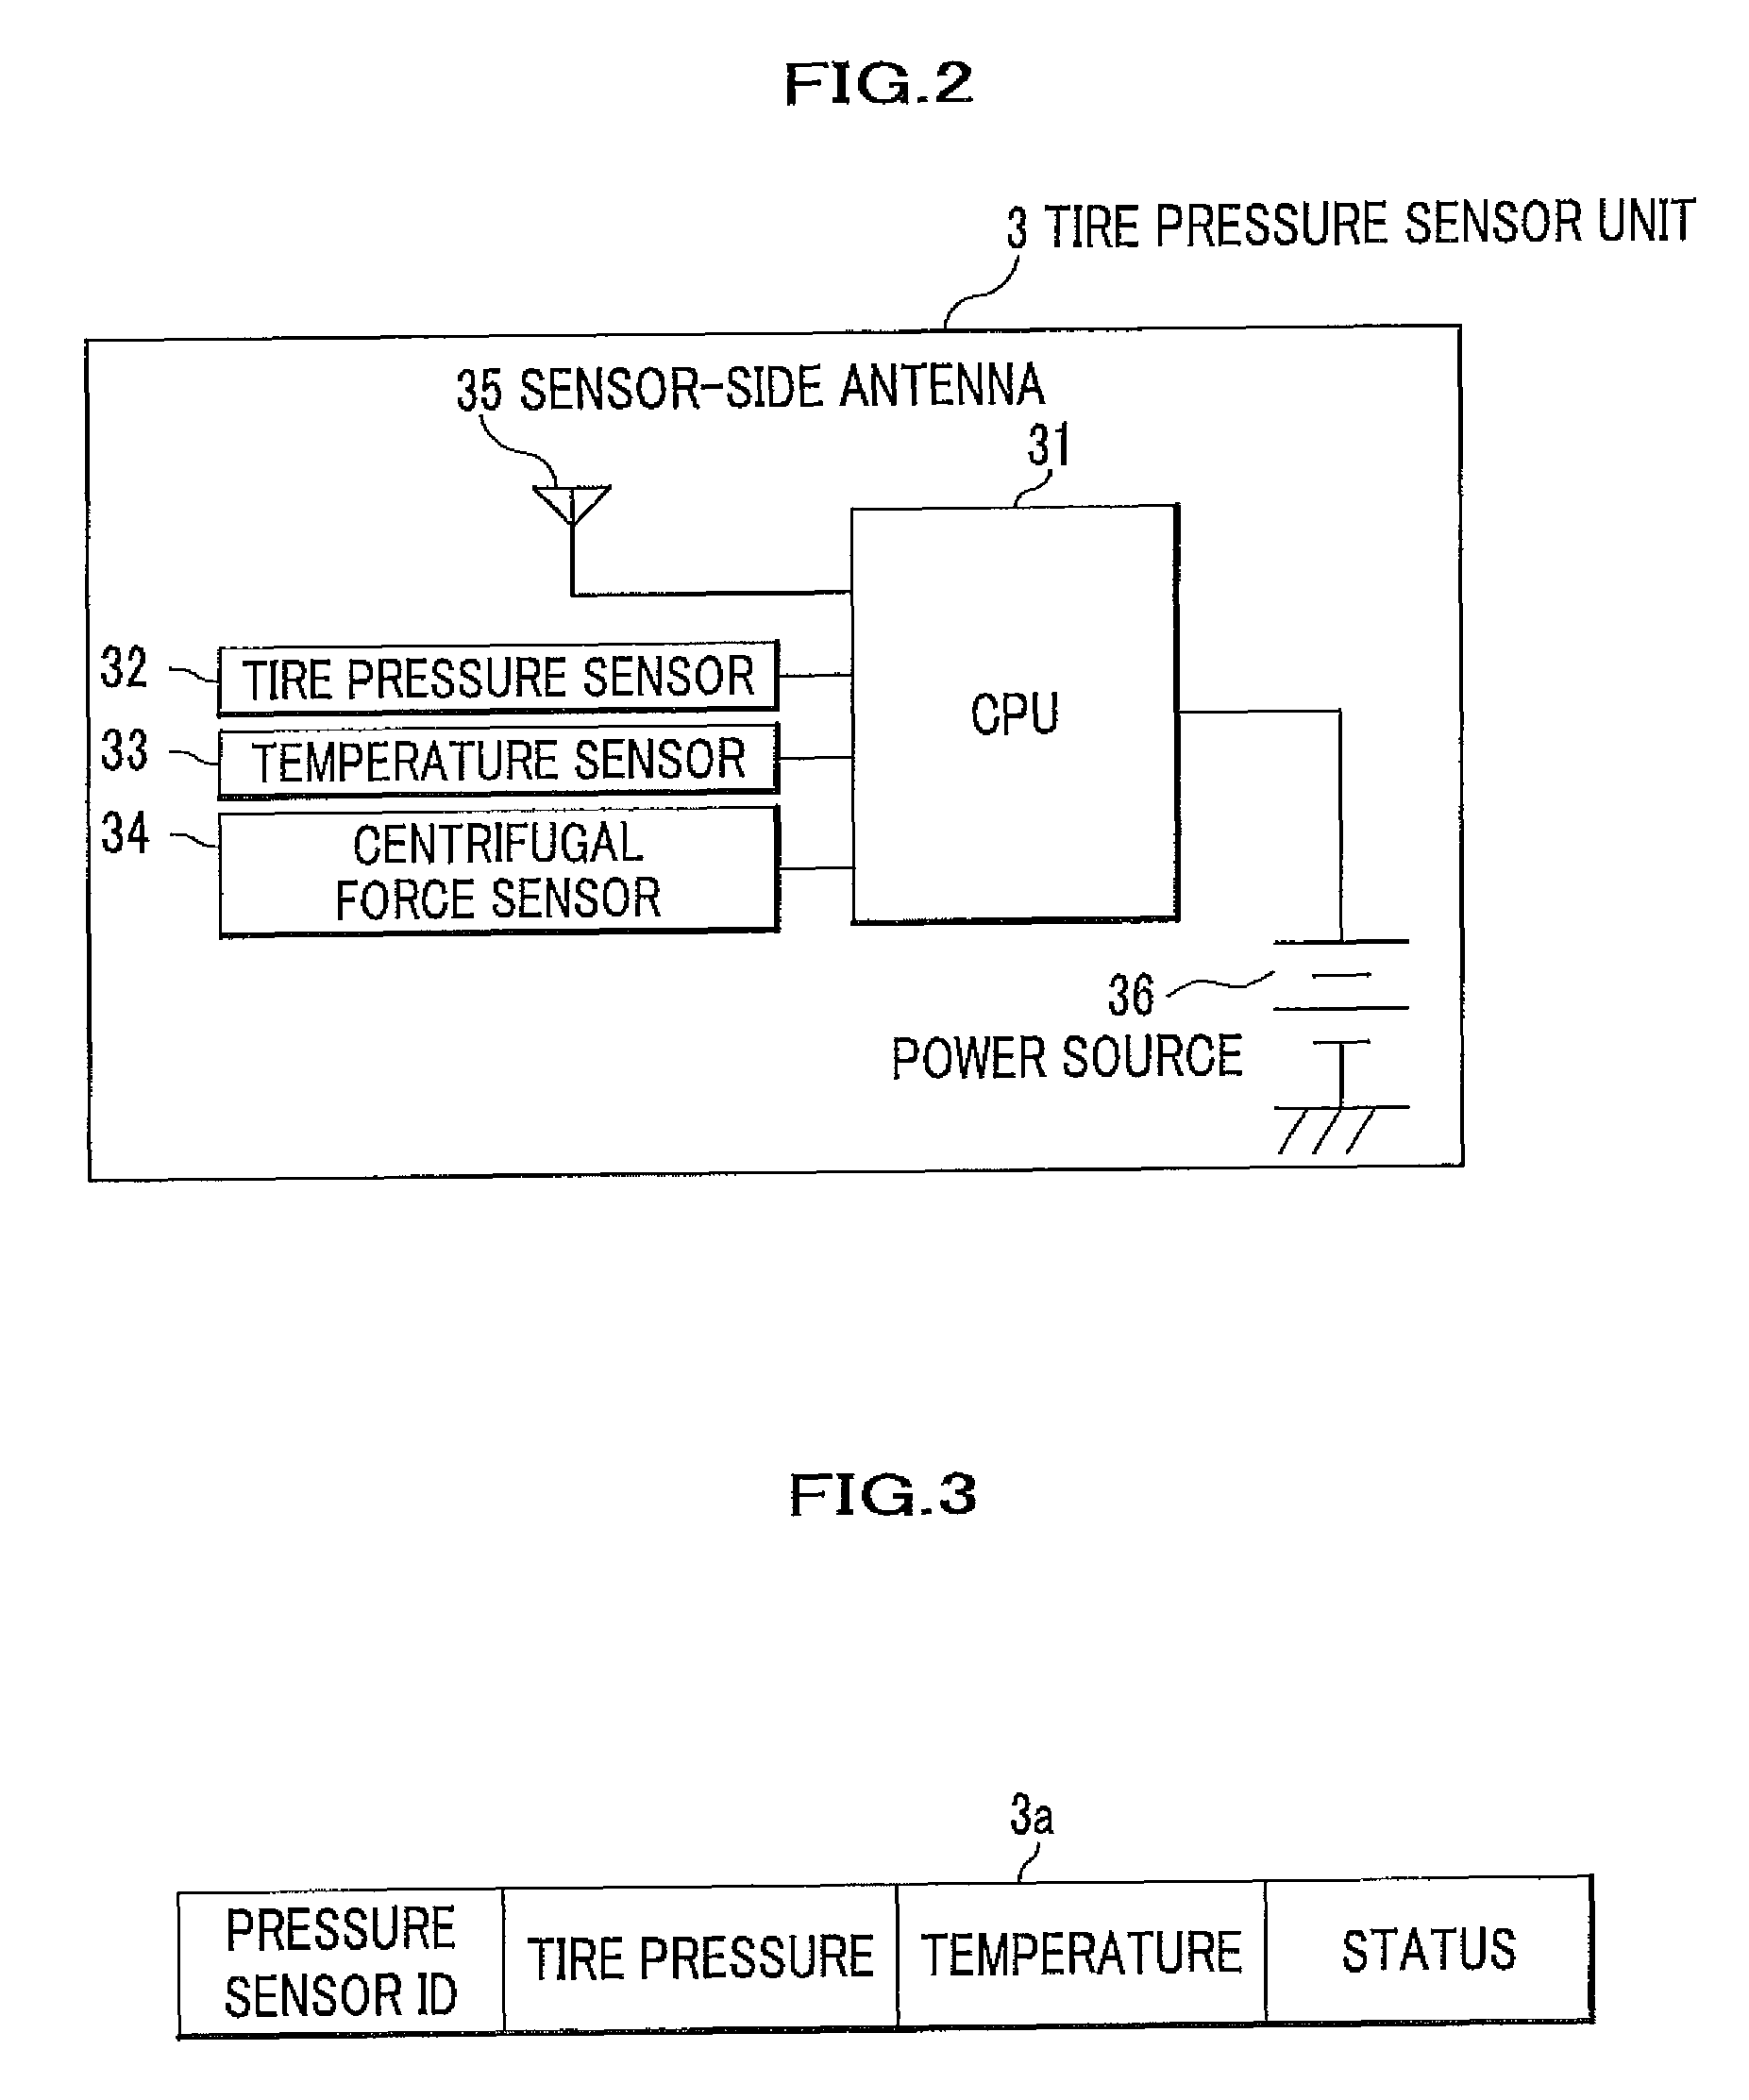 Tire pressure monitoring system and pressure monitoring unit